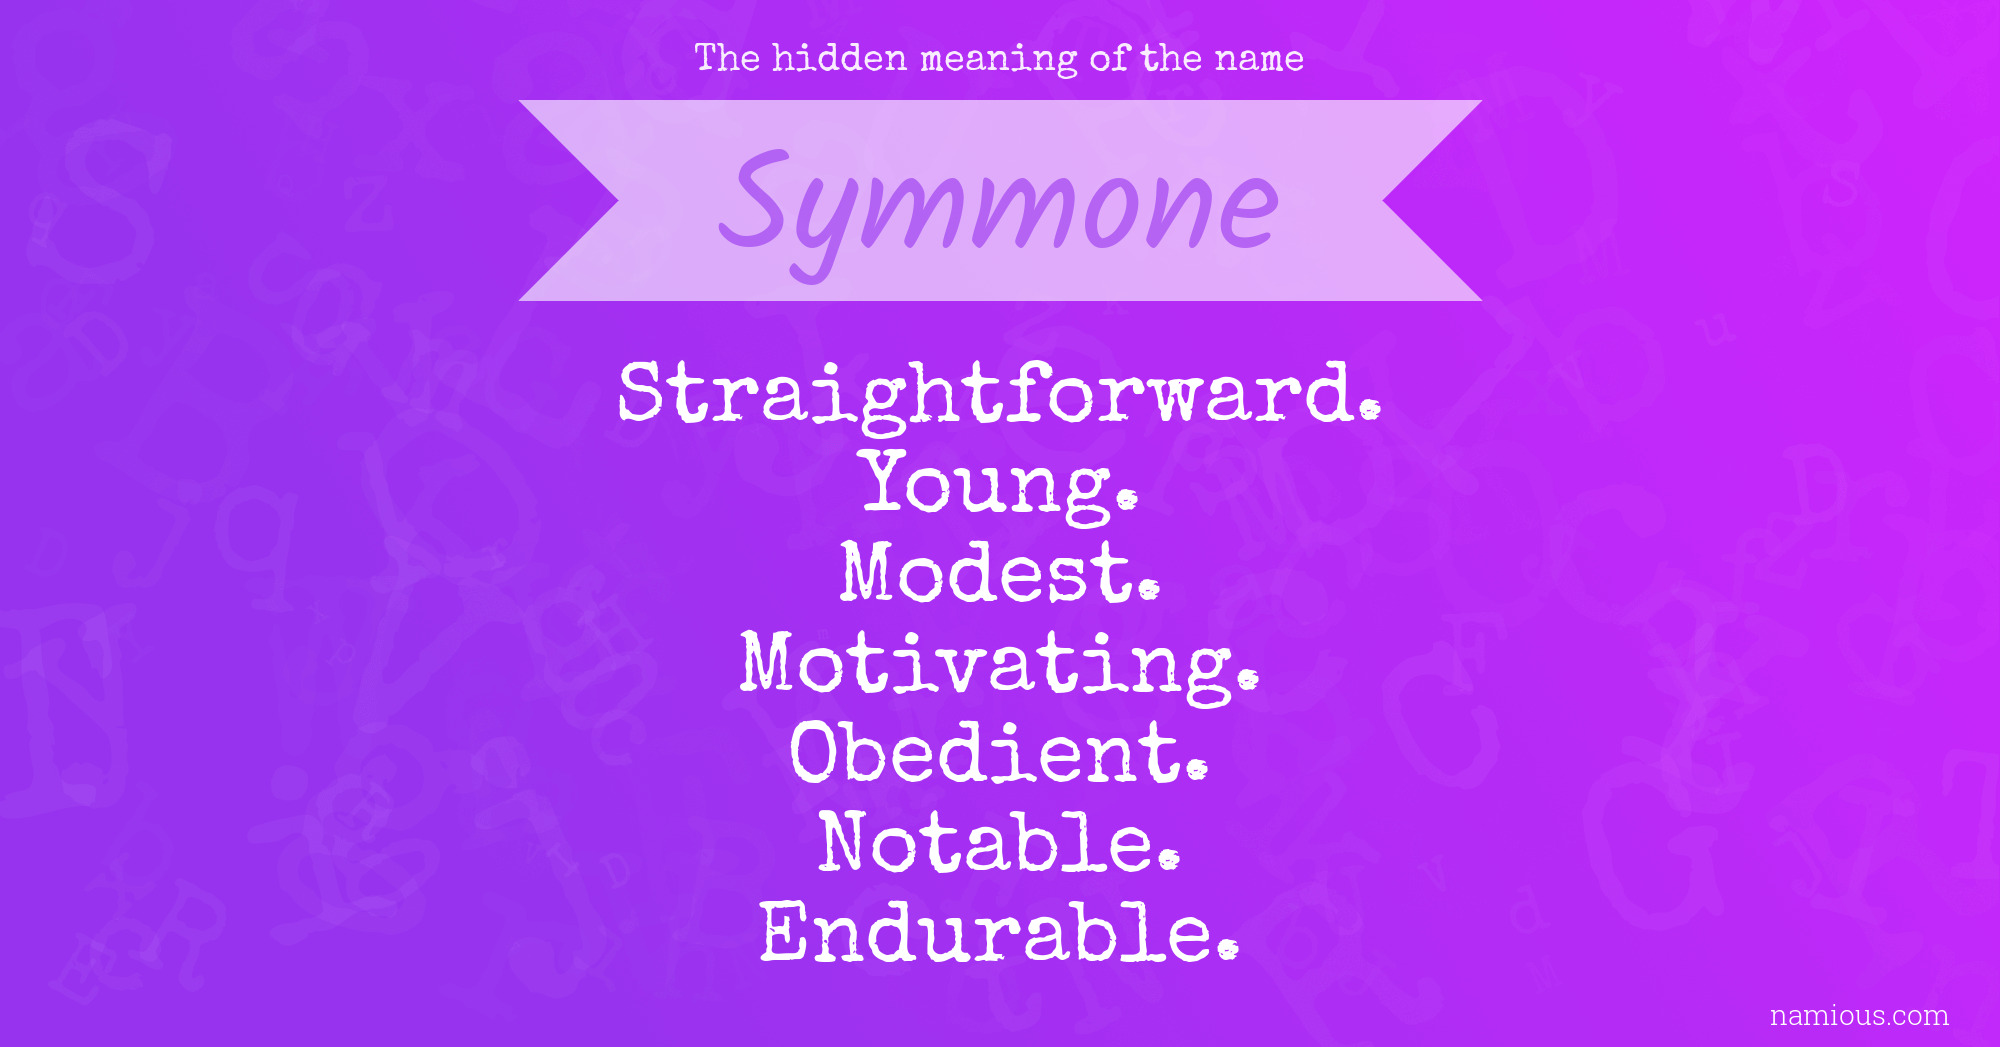 The hidden meaning of the name Symmone